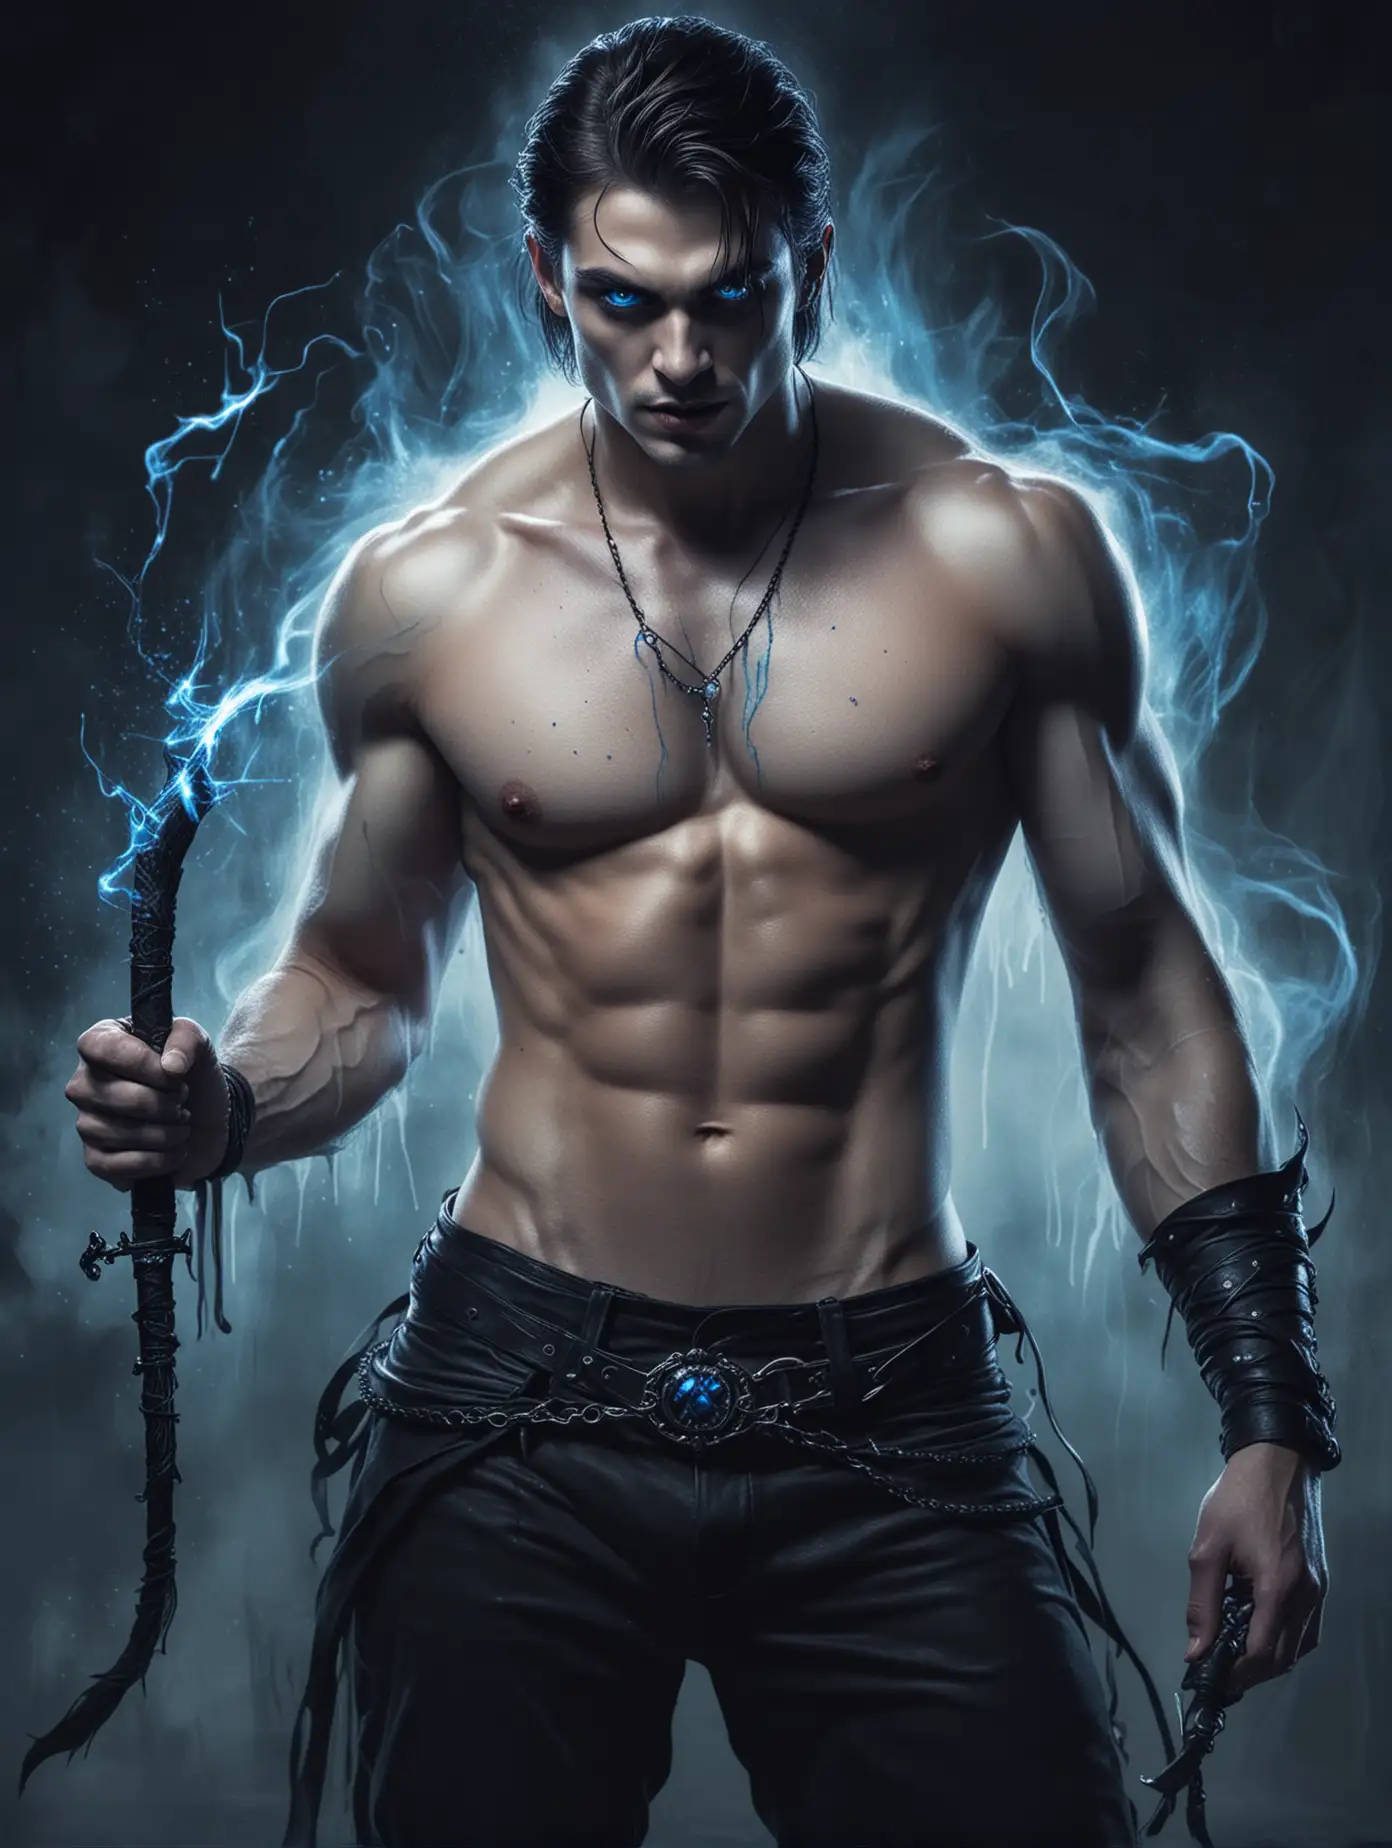 Seductive Shirtless Vampire with Blue Eyes and Whip in Misty Blue Atmosphere